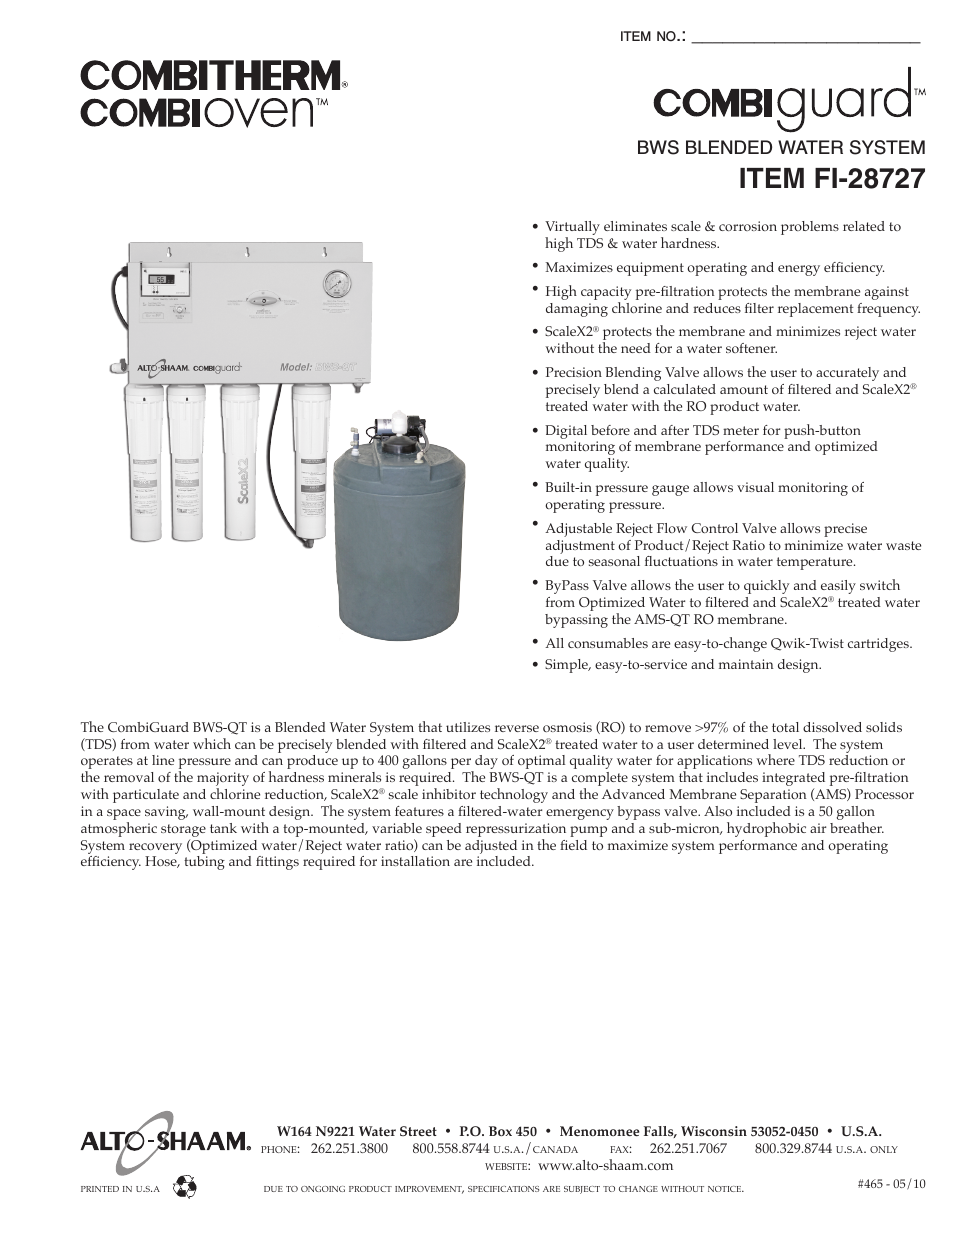 BWS BLENDED WATER SYSTEM FI-28727